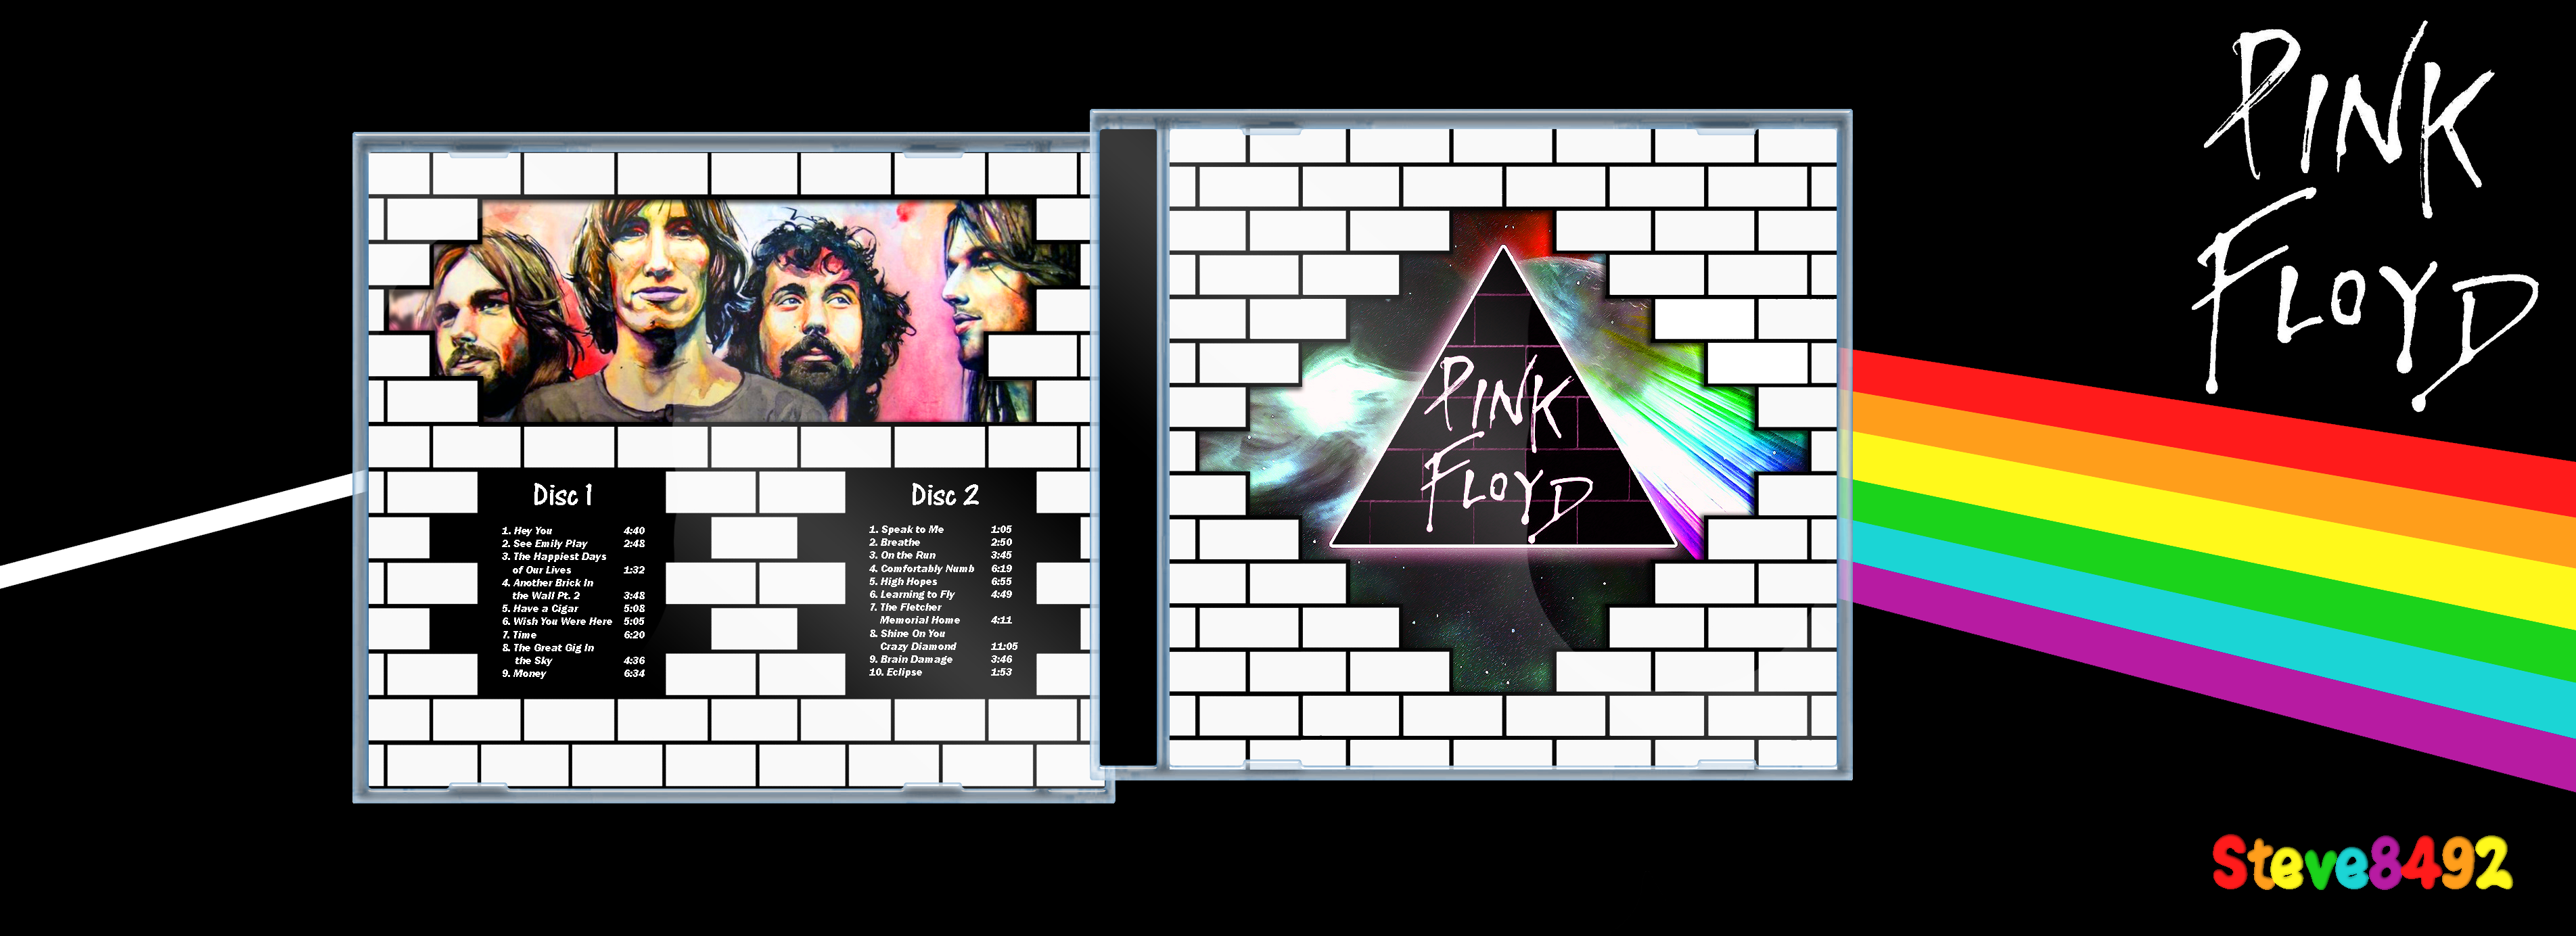 Pink Floyd box cover